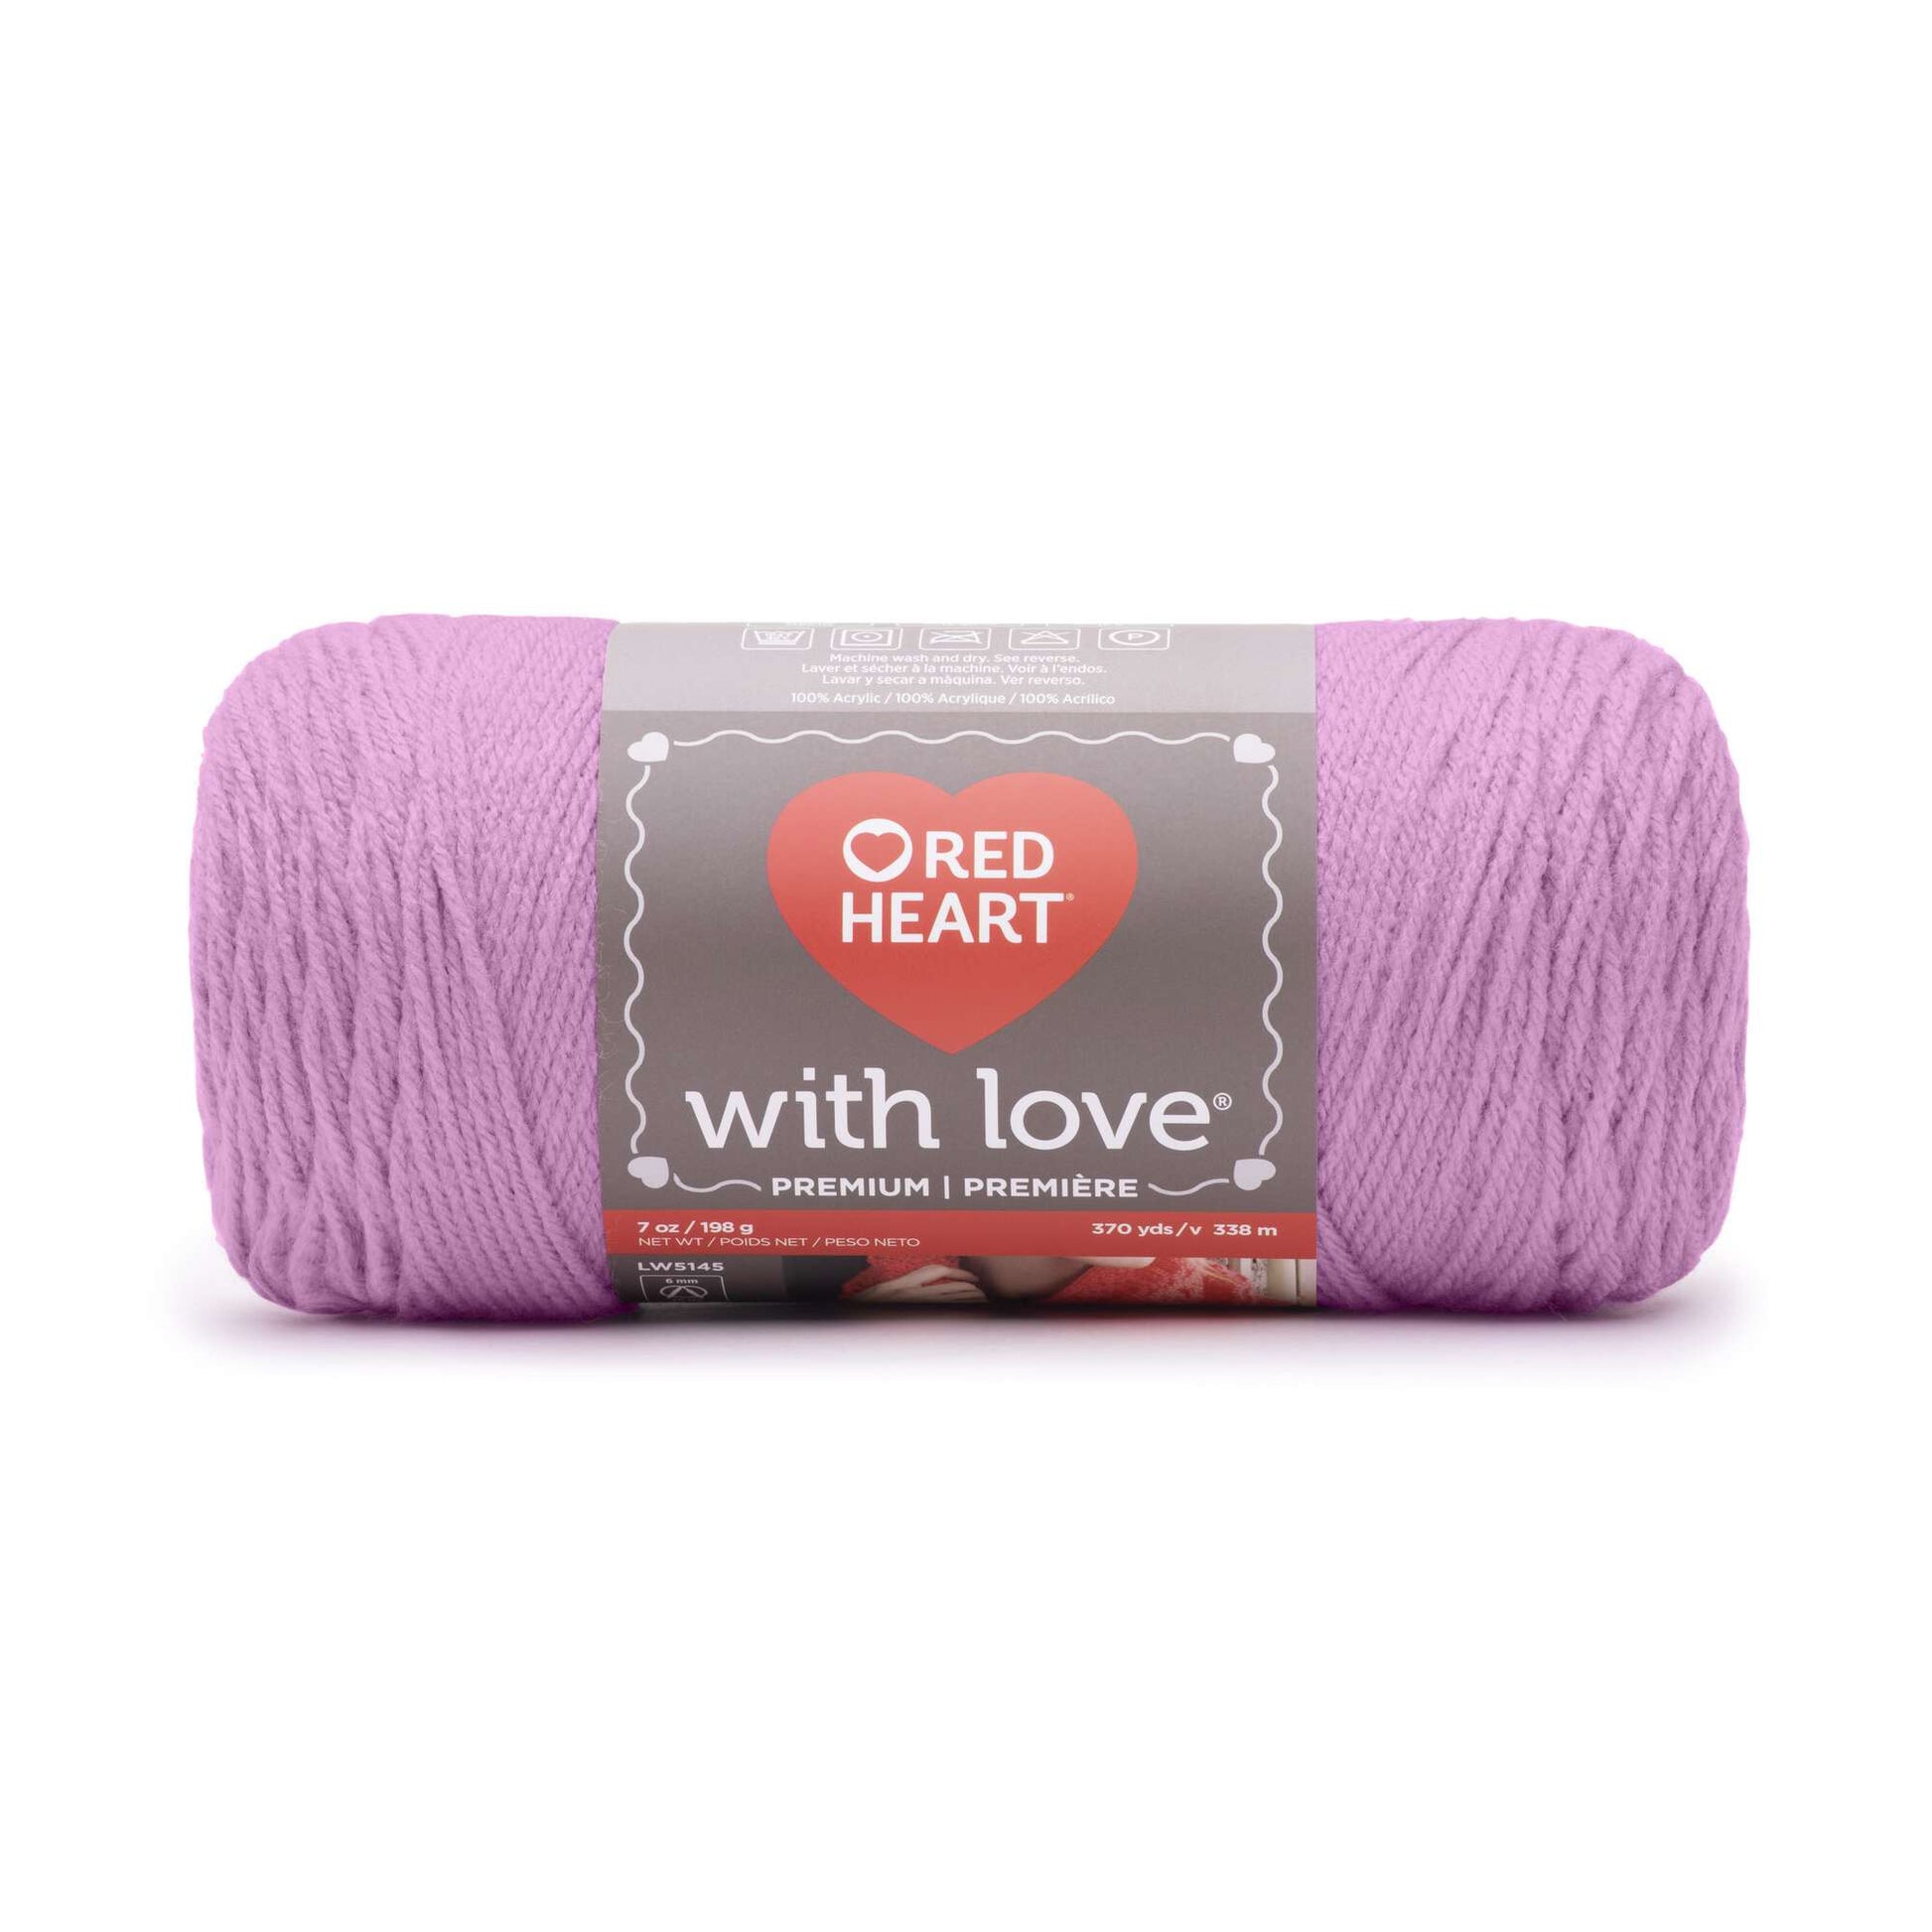  Red Heart with Love Stone Yarn - 3 Pack of 198g/7oz - Acrylic -  4 Medium (Worsted) - 370 Yards - Knitting/Crochet